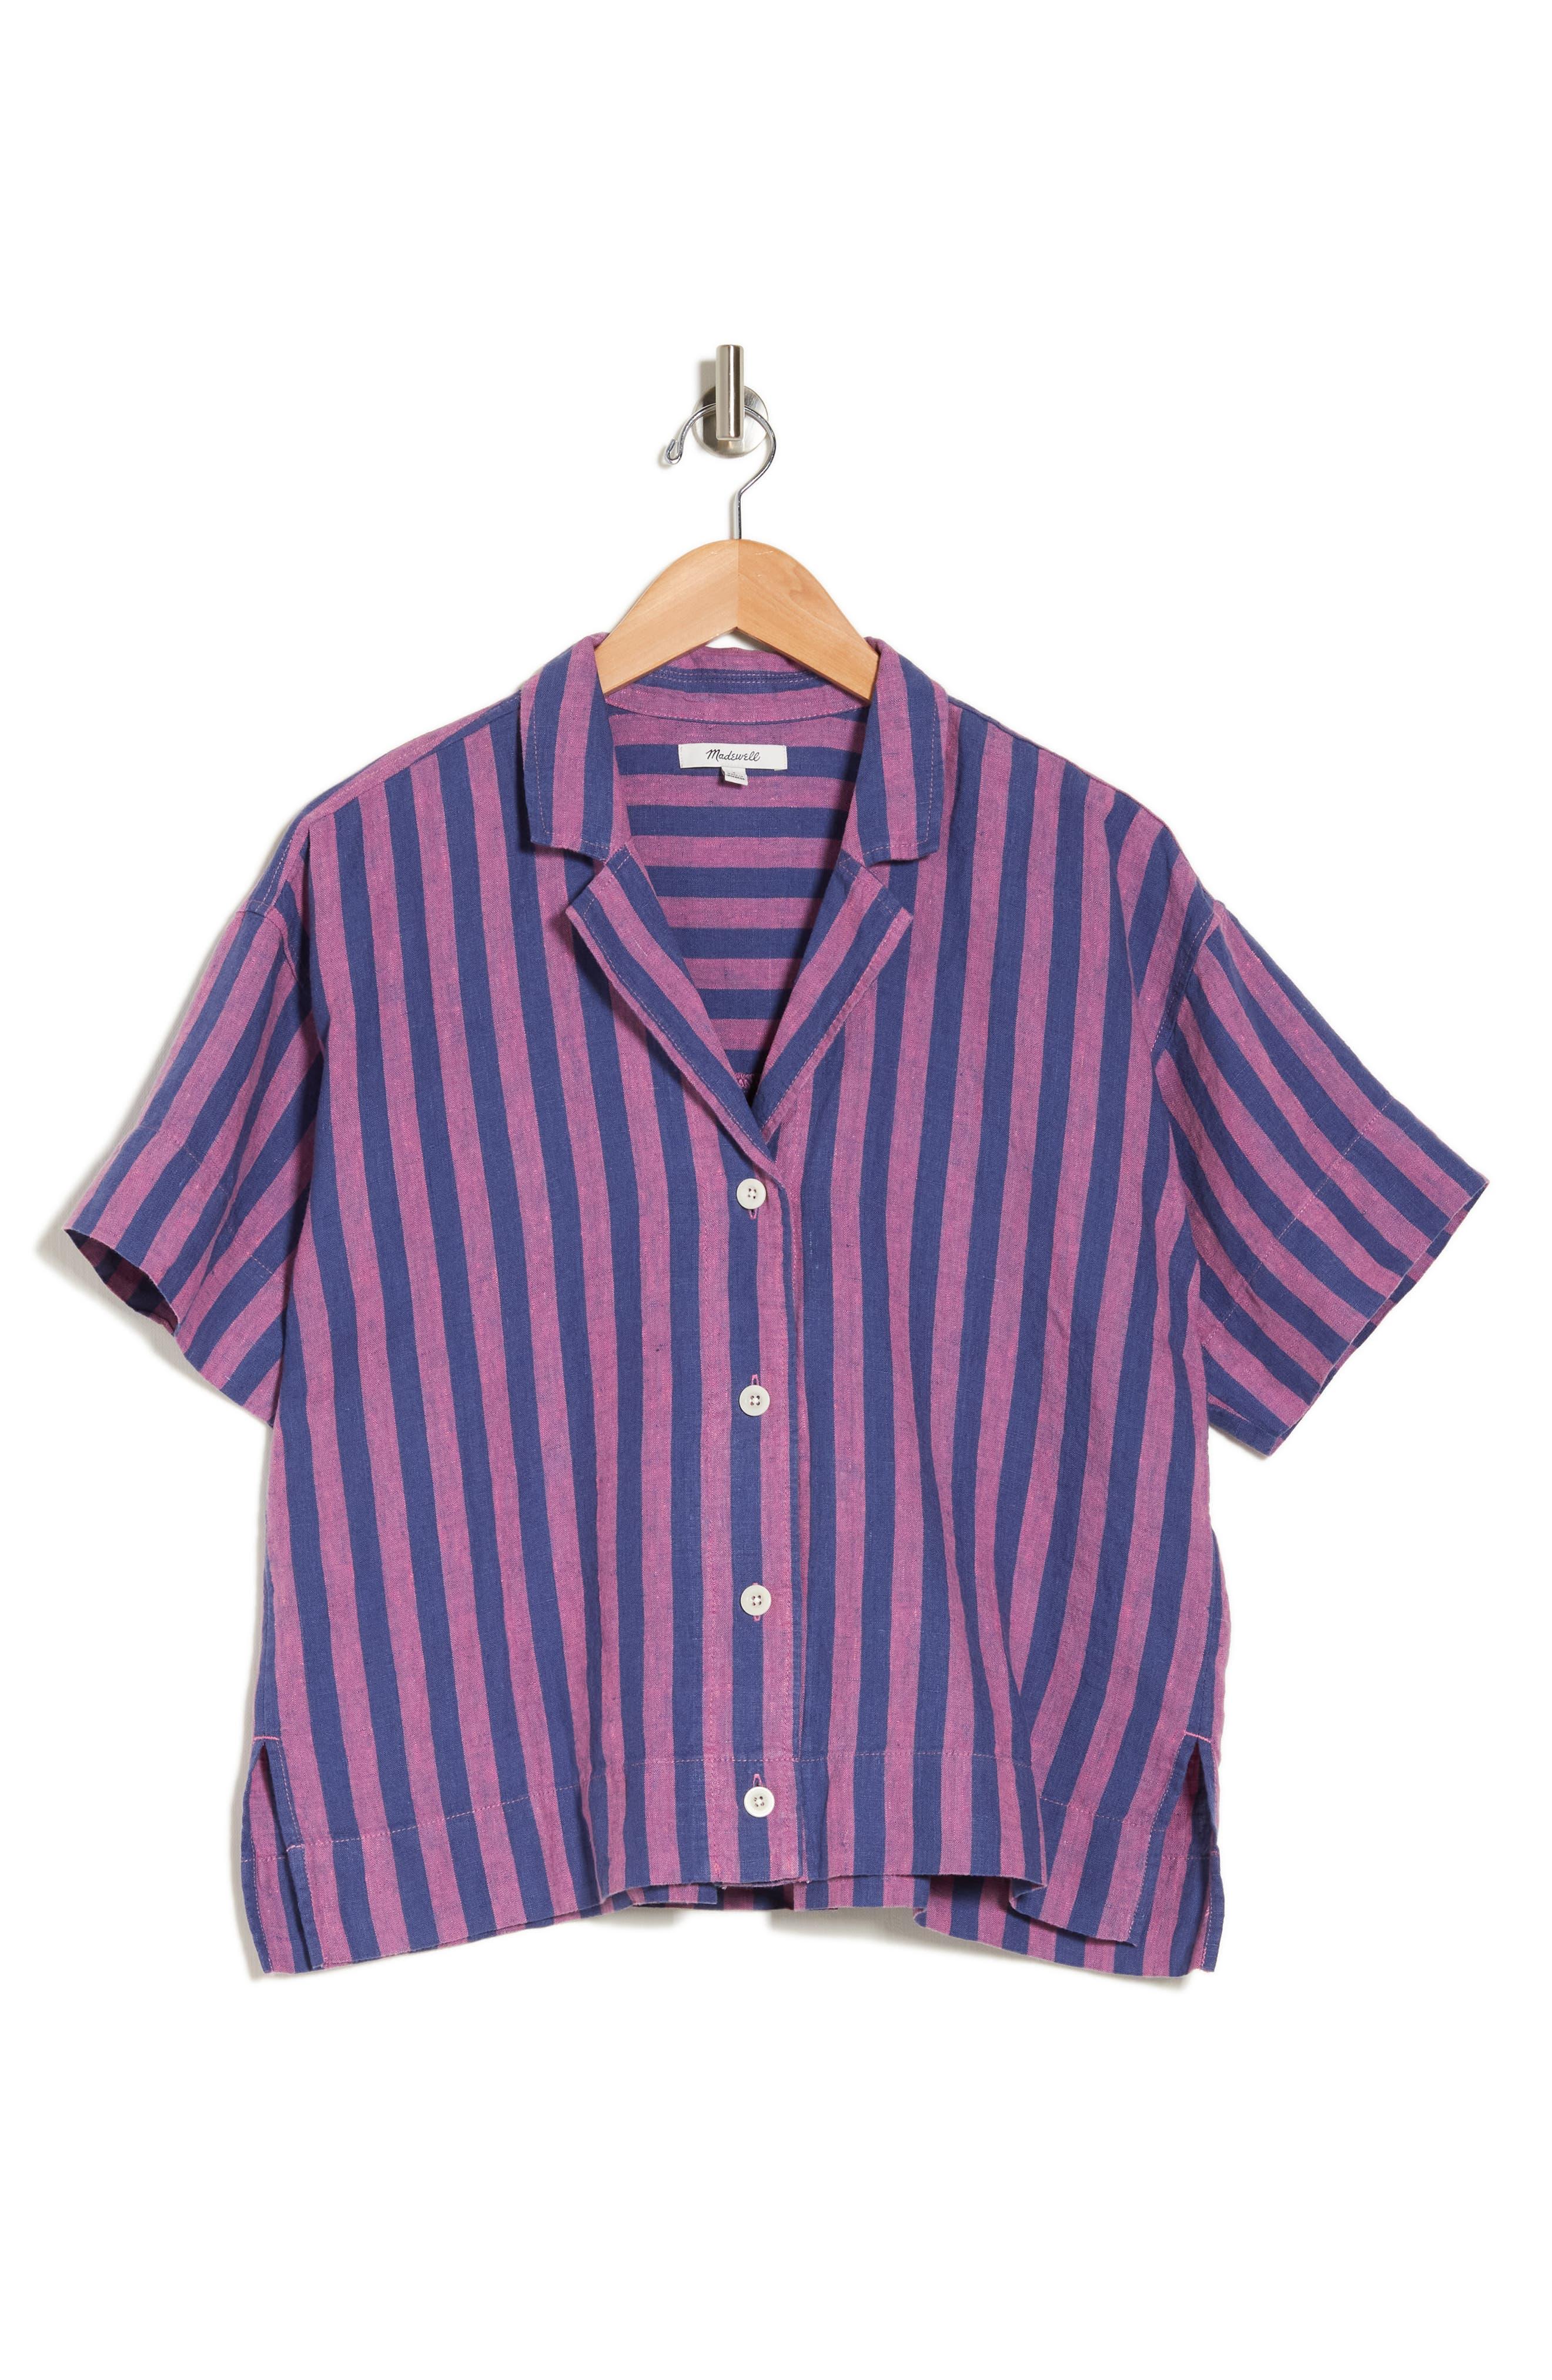 Madewell Stripe Square Camp Shirt in Purple